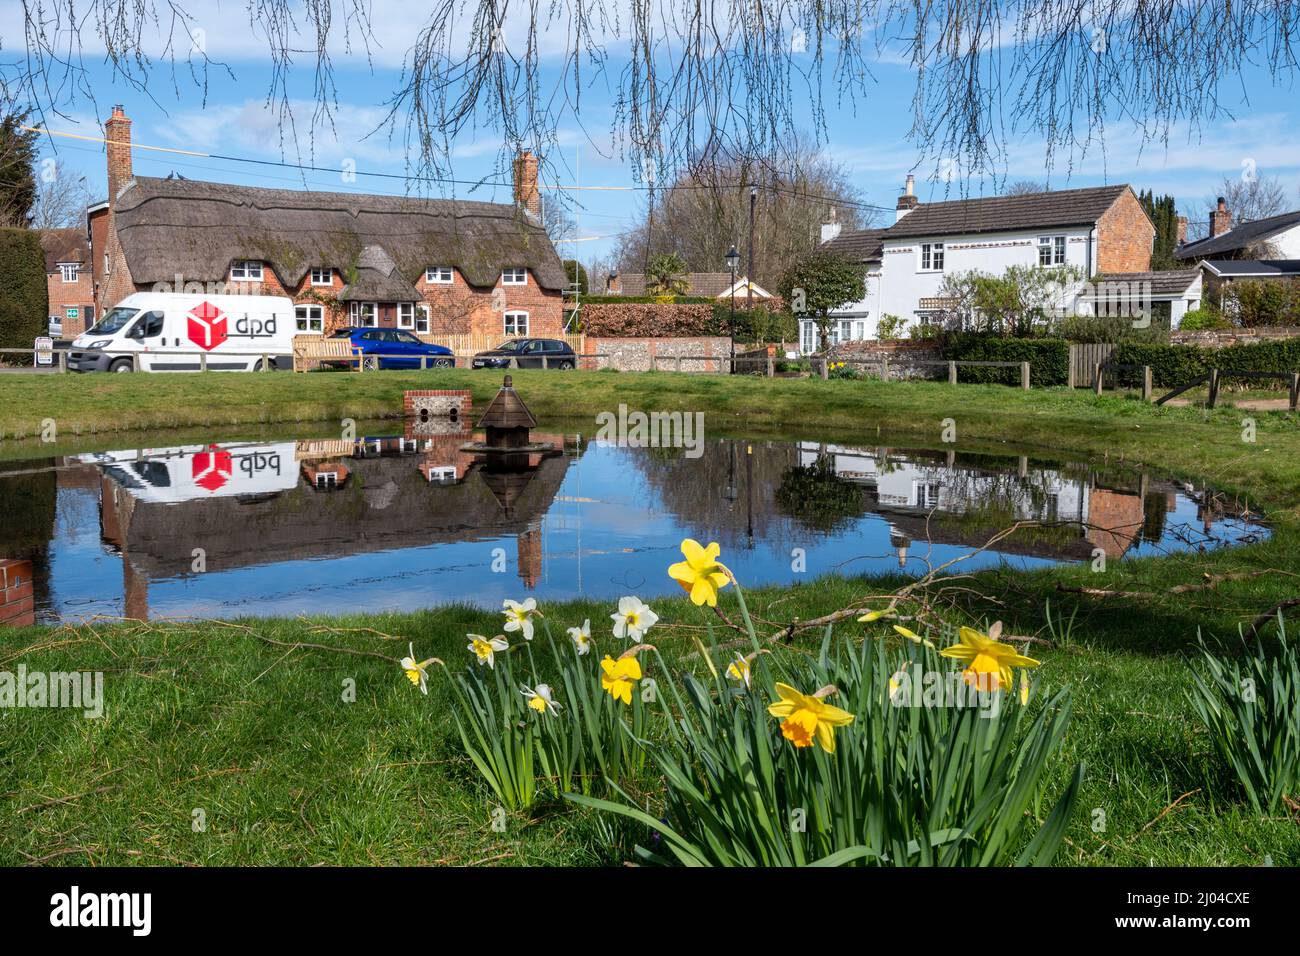 Oakley village centre with daffodils by the duck pond during spring, Hampshire, England, UK, and a DPD parcel delivery van Stock Photo